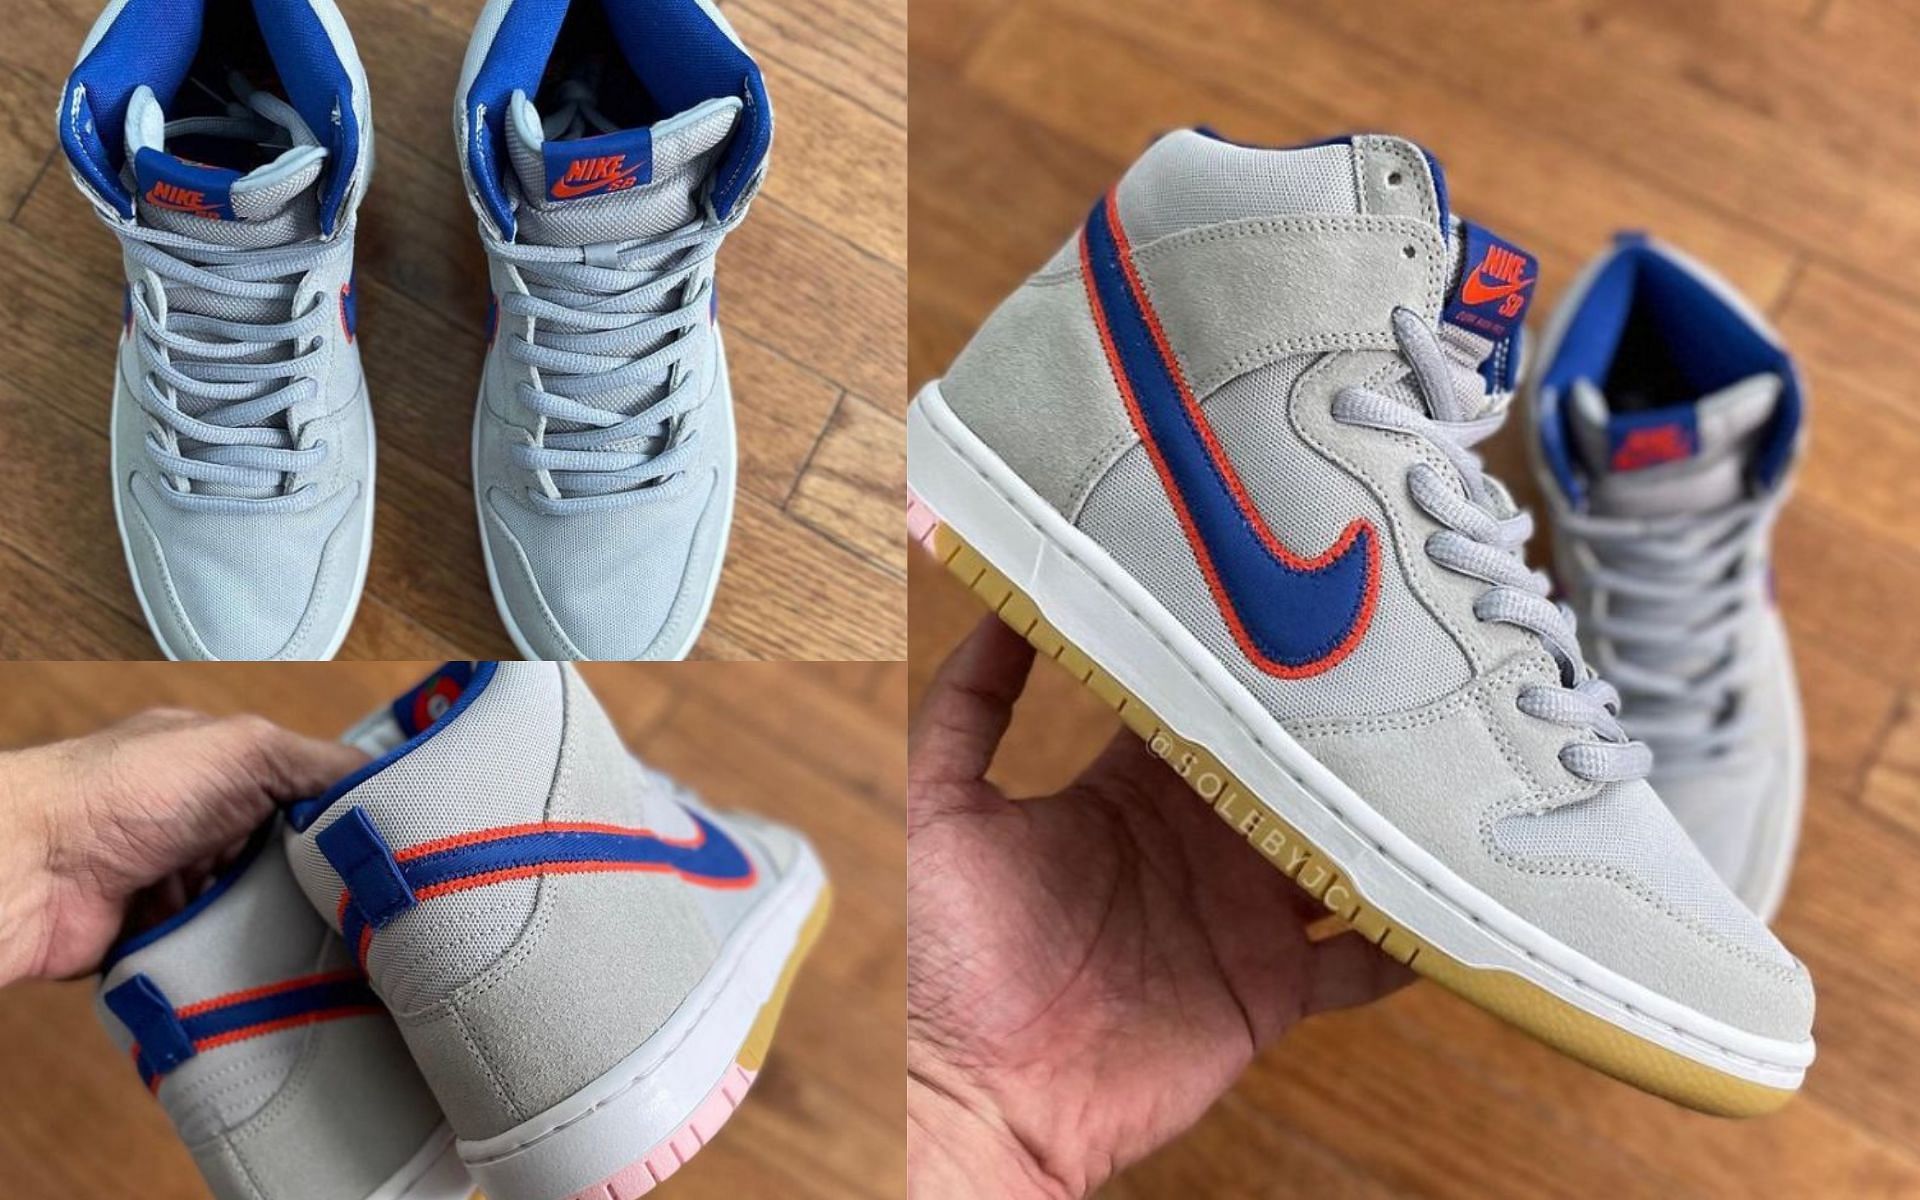 Nike SB Dunk High: All you need to know about the “New York Mets” inspired  sneakers